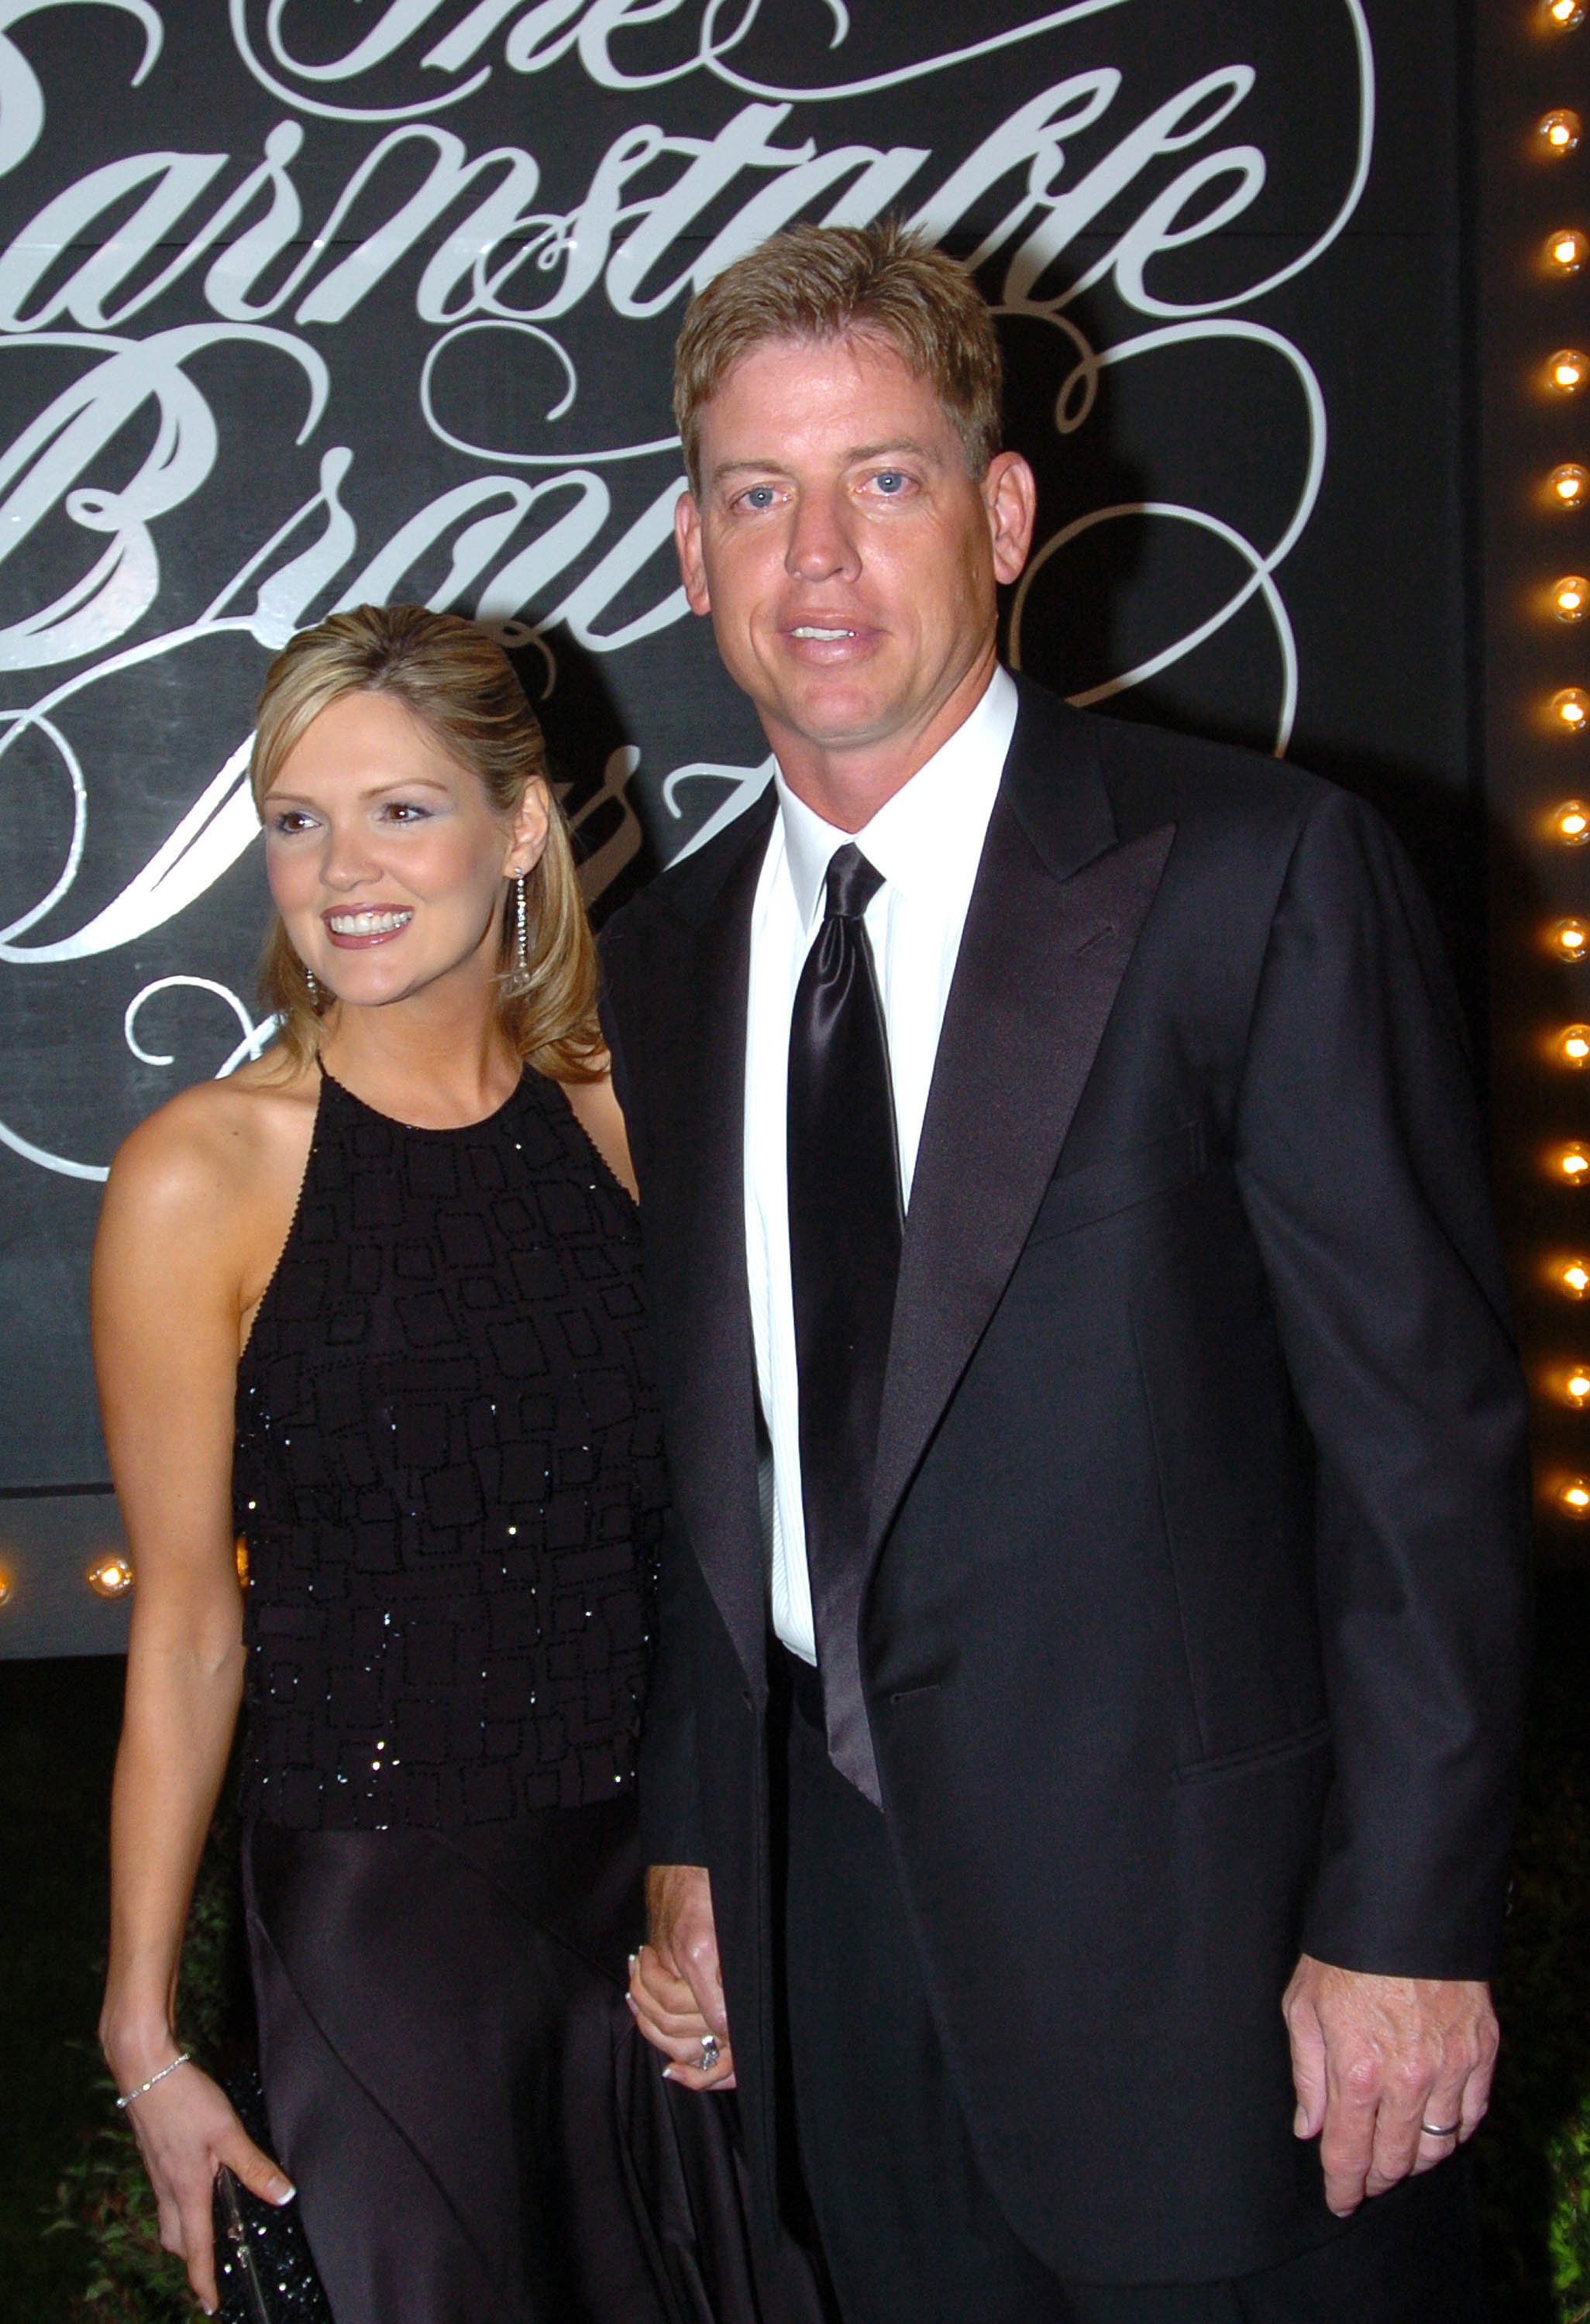 Rhonda Worthey and Troy Aikman at The Barnstable Brown Party on April 30, 2004. | Source: Getty Images